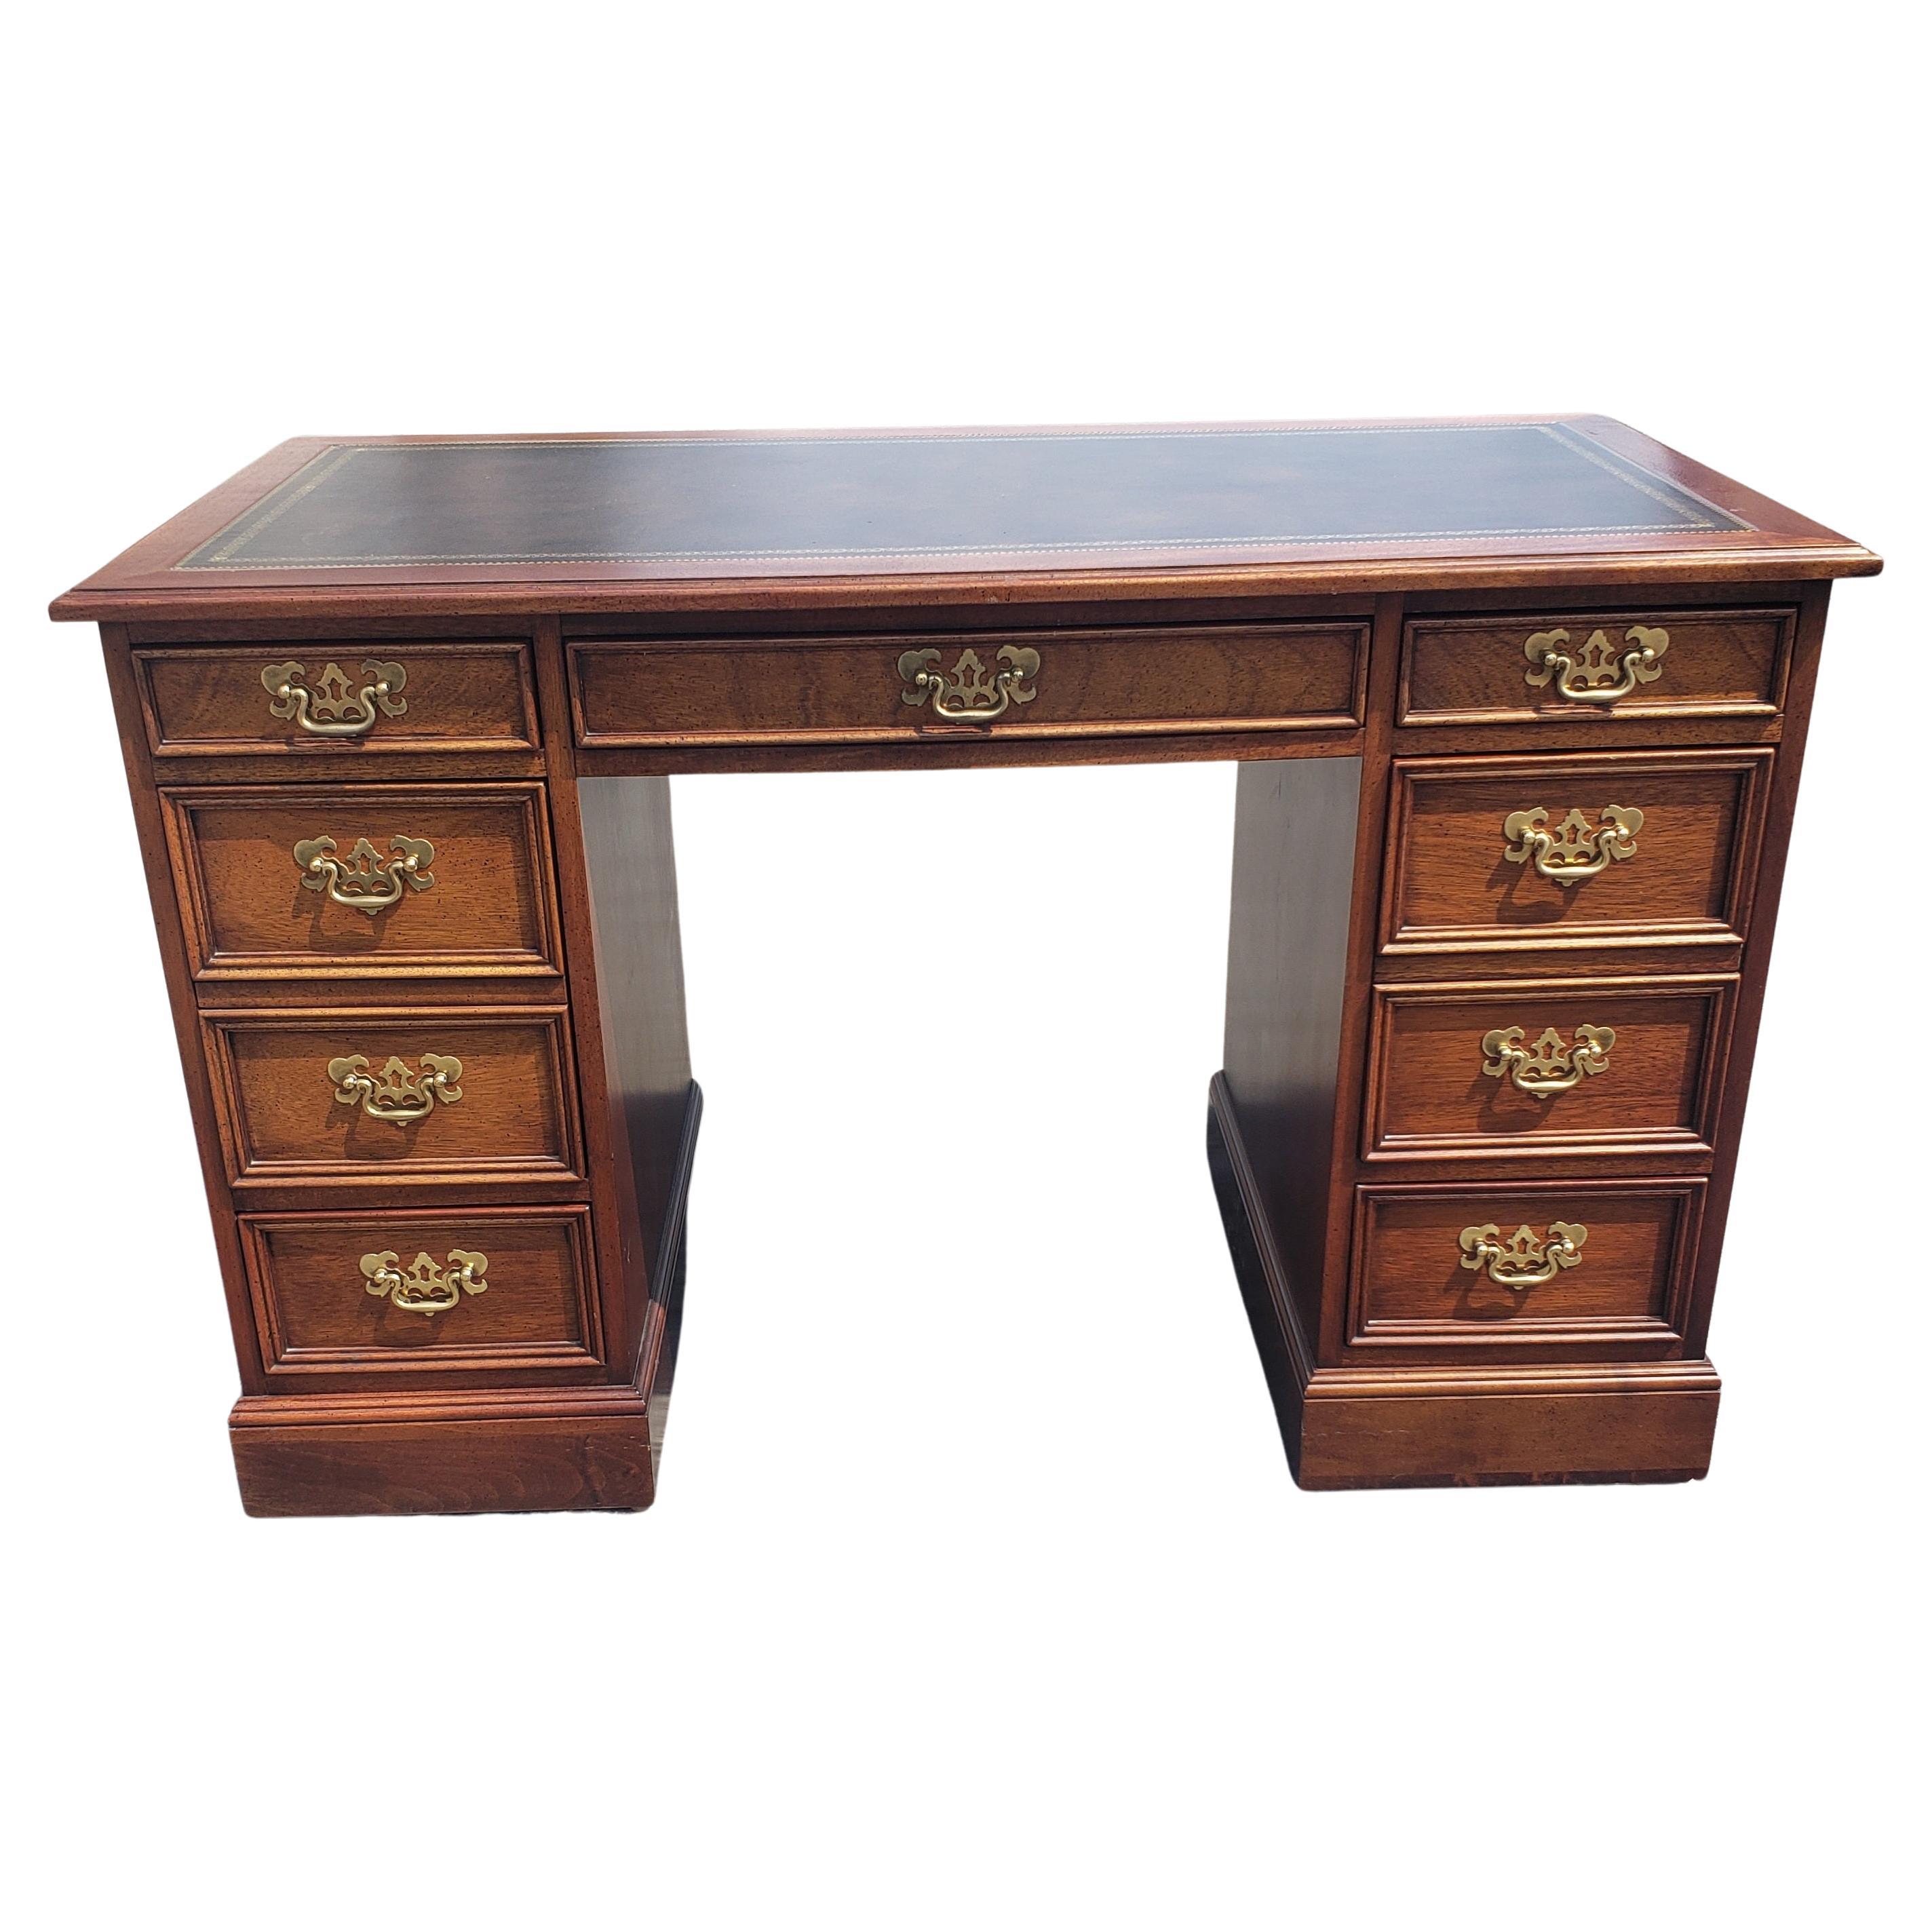 Sligh Furniture Chippendale Mahogany and Tooled Leather Partners Desk with Glass